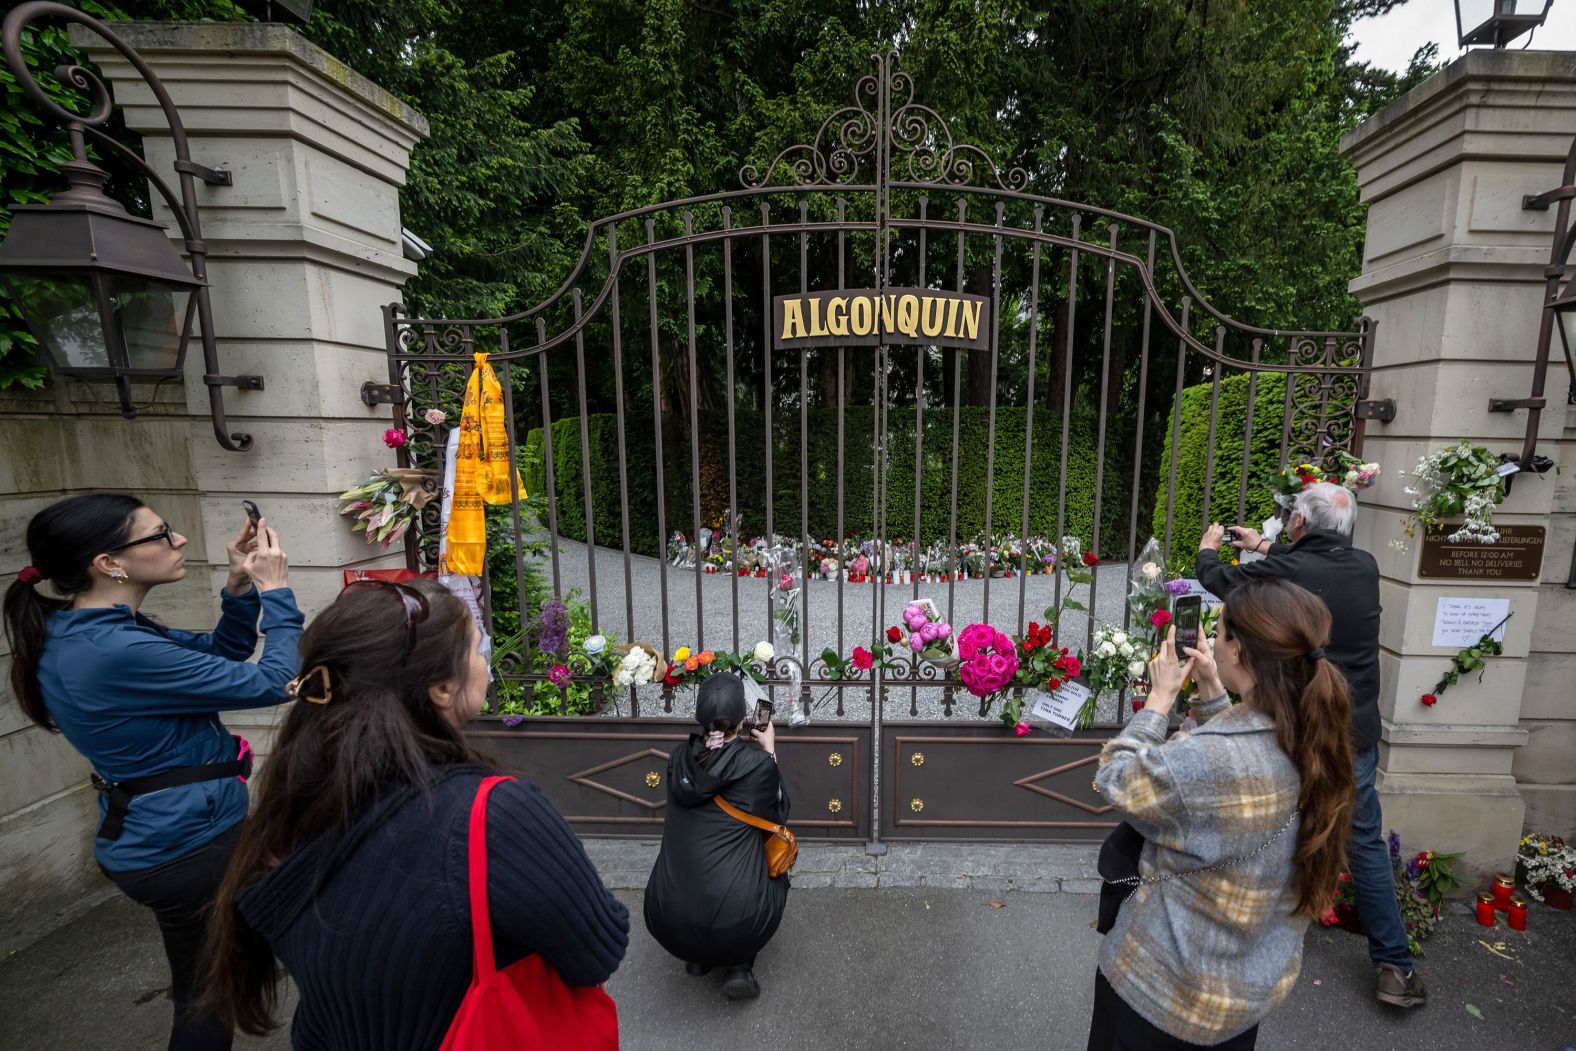 People in Küsnacht, Switzerland, take pictures outside the estate of late singer <a href="index.php?page=&url=https%3A%2F%2Fwww.cnn.com%2F2023%2F05%2F24%2Fentertainment%2Fgallery%2Ftina-turner%2Findex.html" target="_blank">Tina Turner</a> on Thursday, May 25. Turner, who rose from humble beginnings and overcame a notoriously abusive marriage to become one of the most popular female artists of all time, <a href="index.php?page=&url=https%3A%2F%2Fwww.cnn.com%2F2023%2F05%2F24%2Fentertainment%2Ftina-turner-death%2Findex.html" target="_blank">died this week at the age of 83</a>.